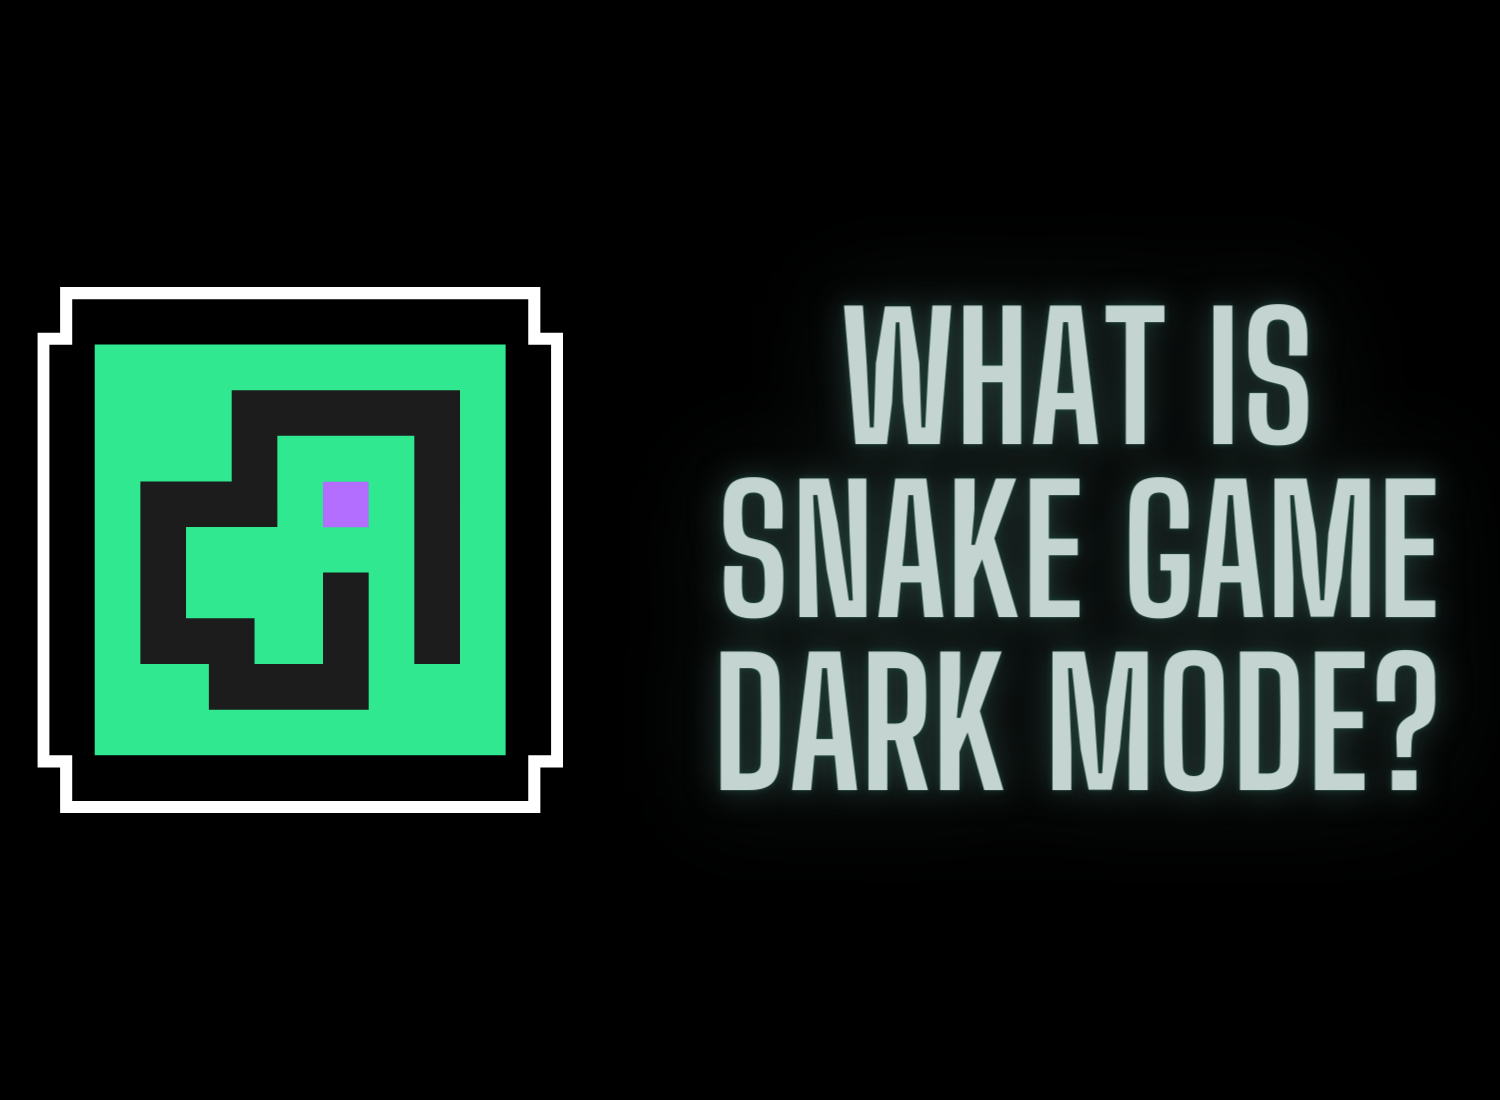 What Is Snake Game Dark Mode?